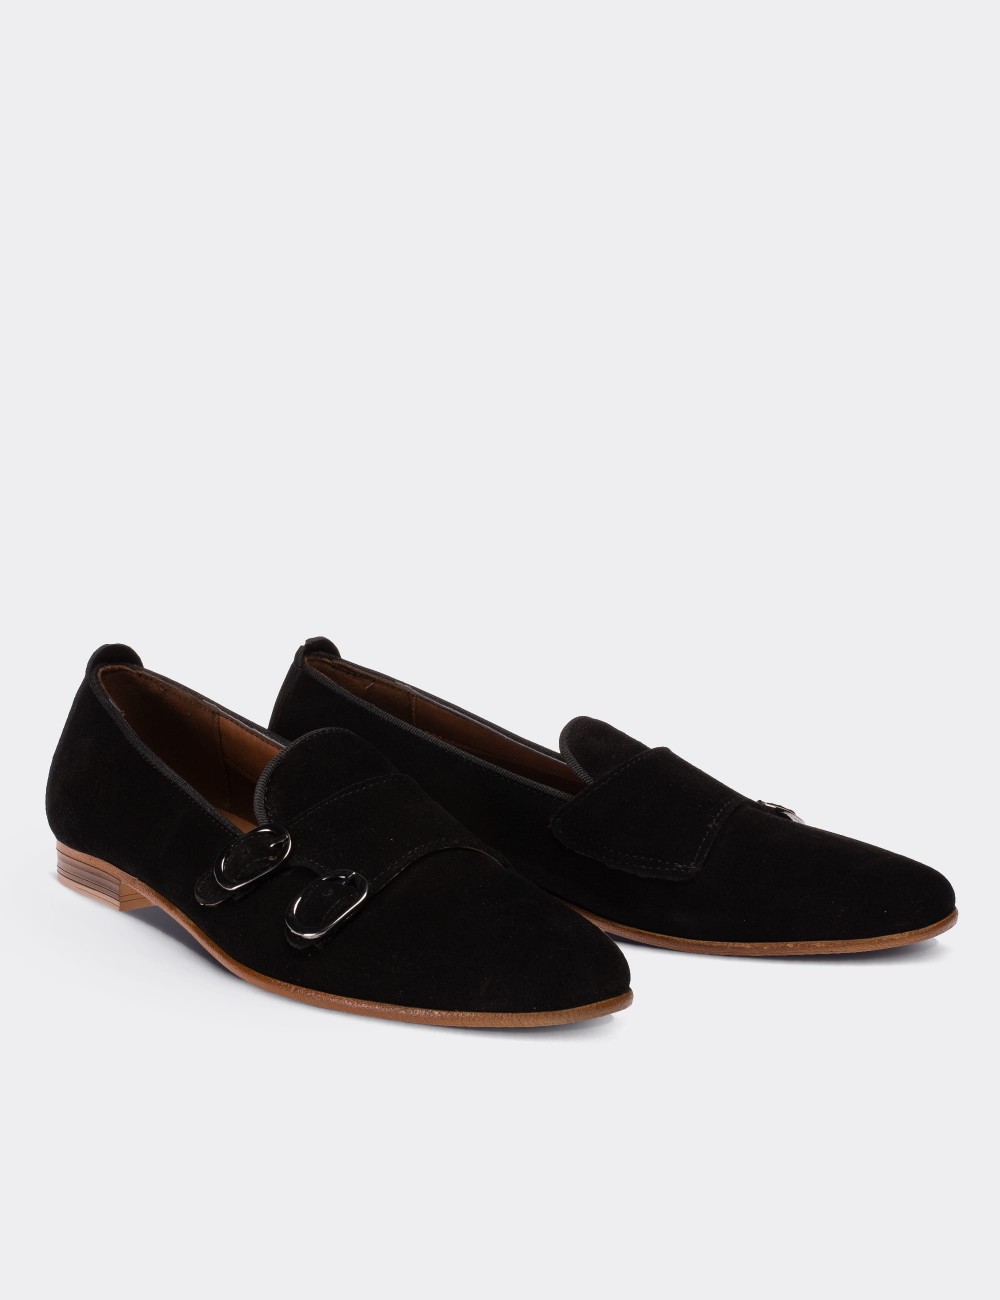 Black Suede Leather Double Monk-Strap Loafers - Deery